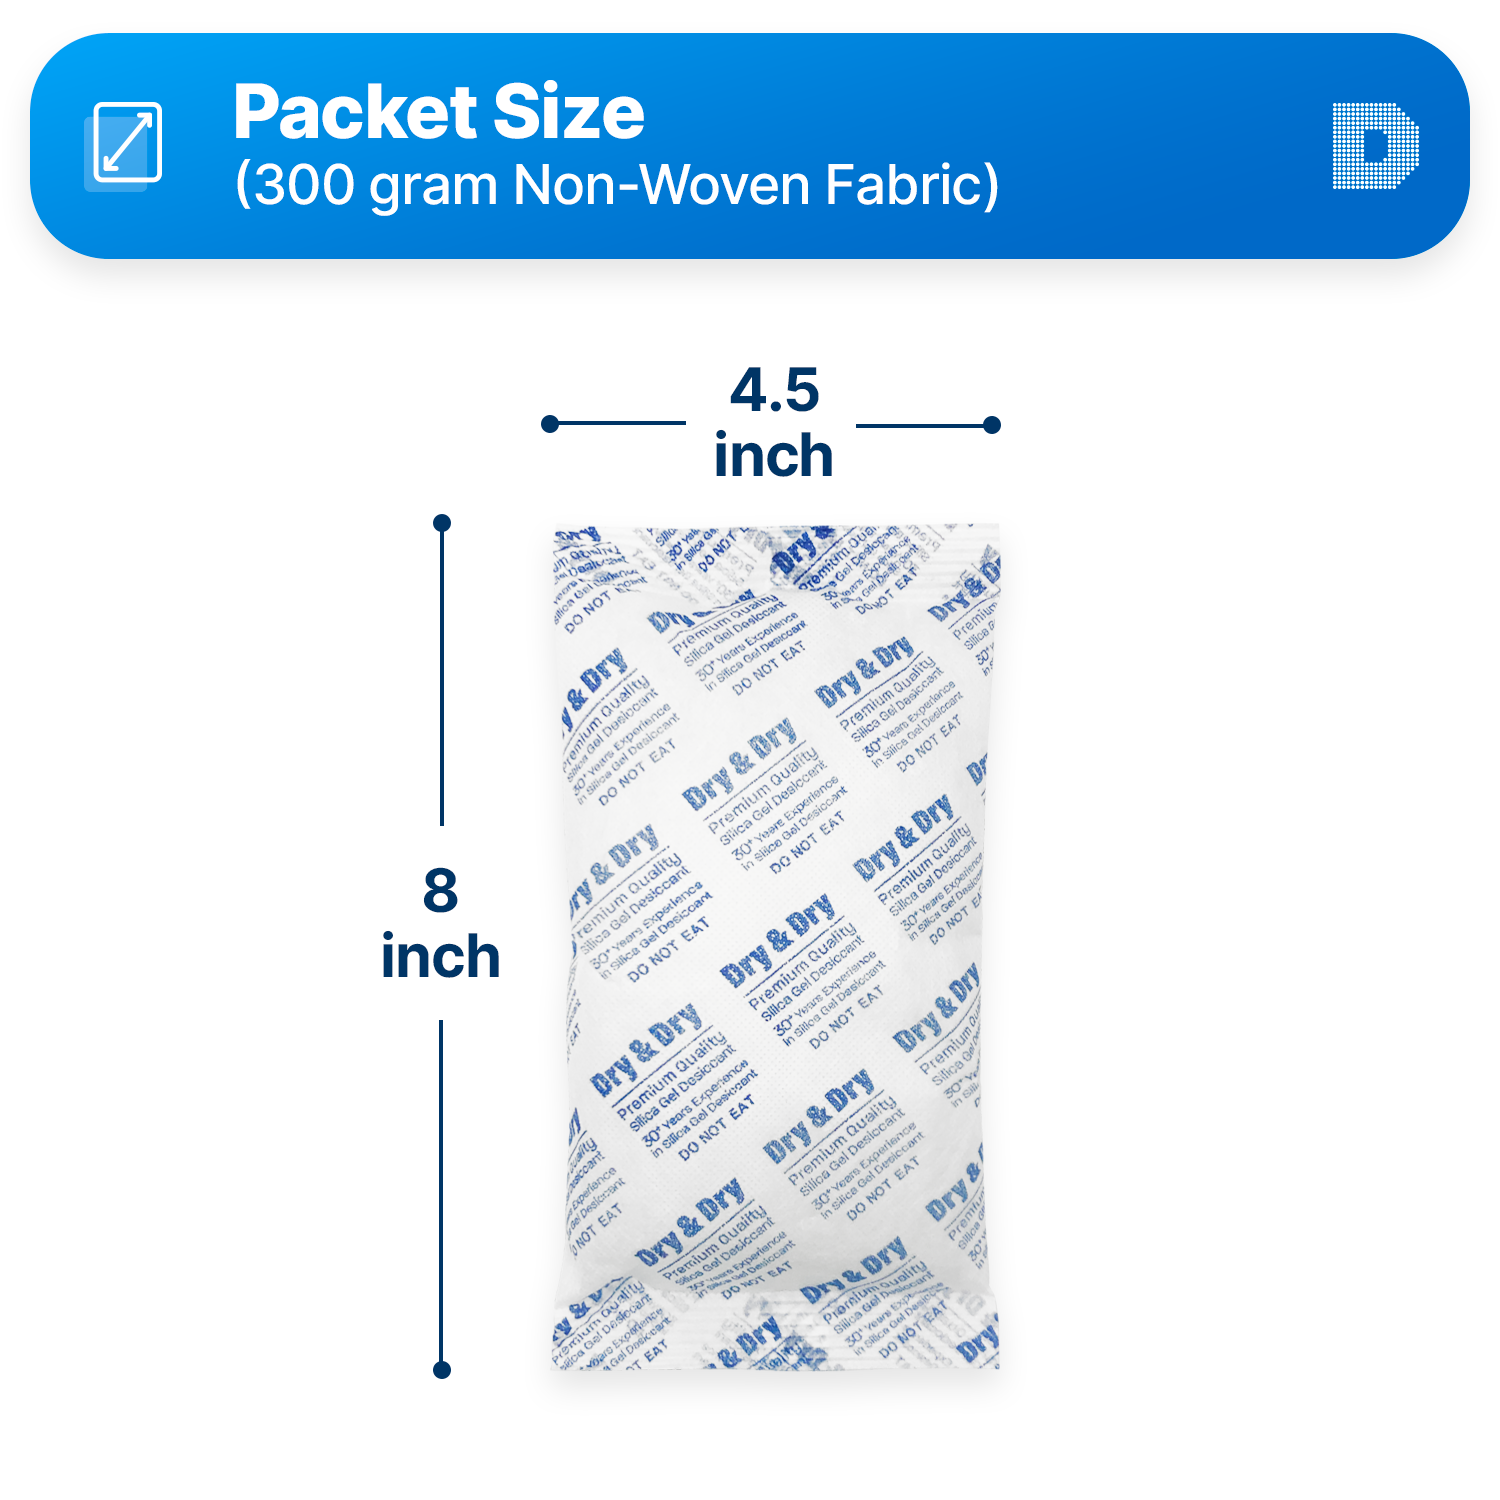 300 Gram [60 Packets]  "Dry & Dry" Premium Pure & Safe Silica Gel Desiccant Packets - Rechargeable Non-Woven Fabric (Cloth)